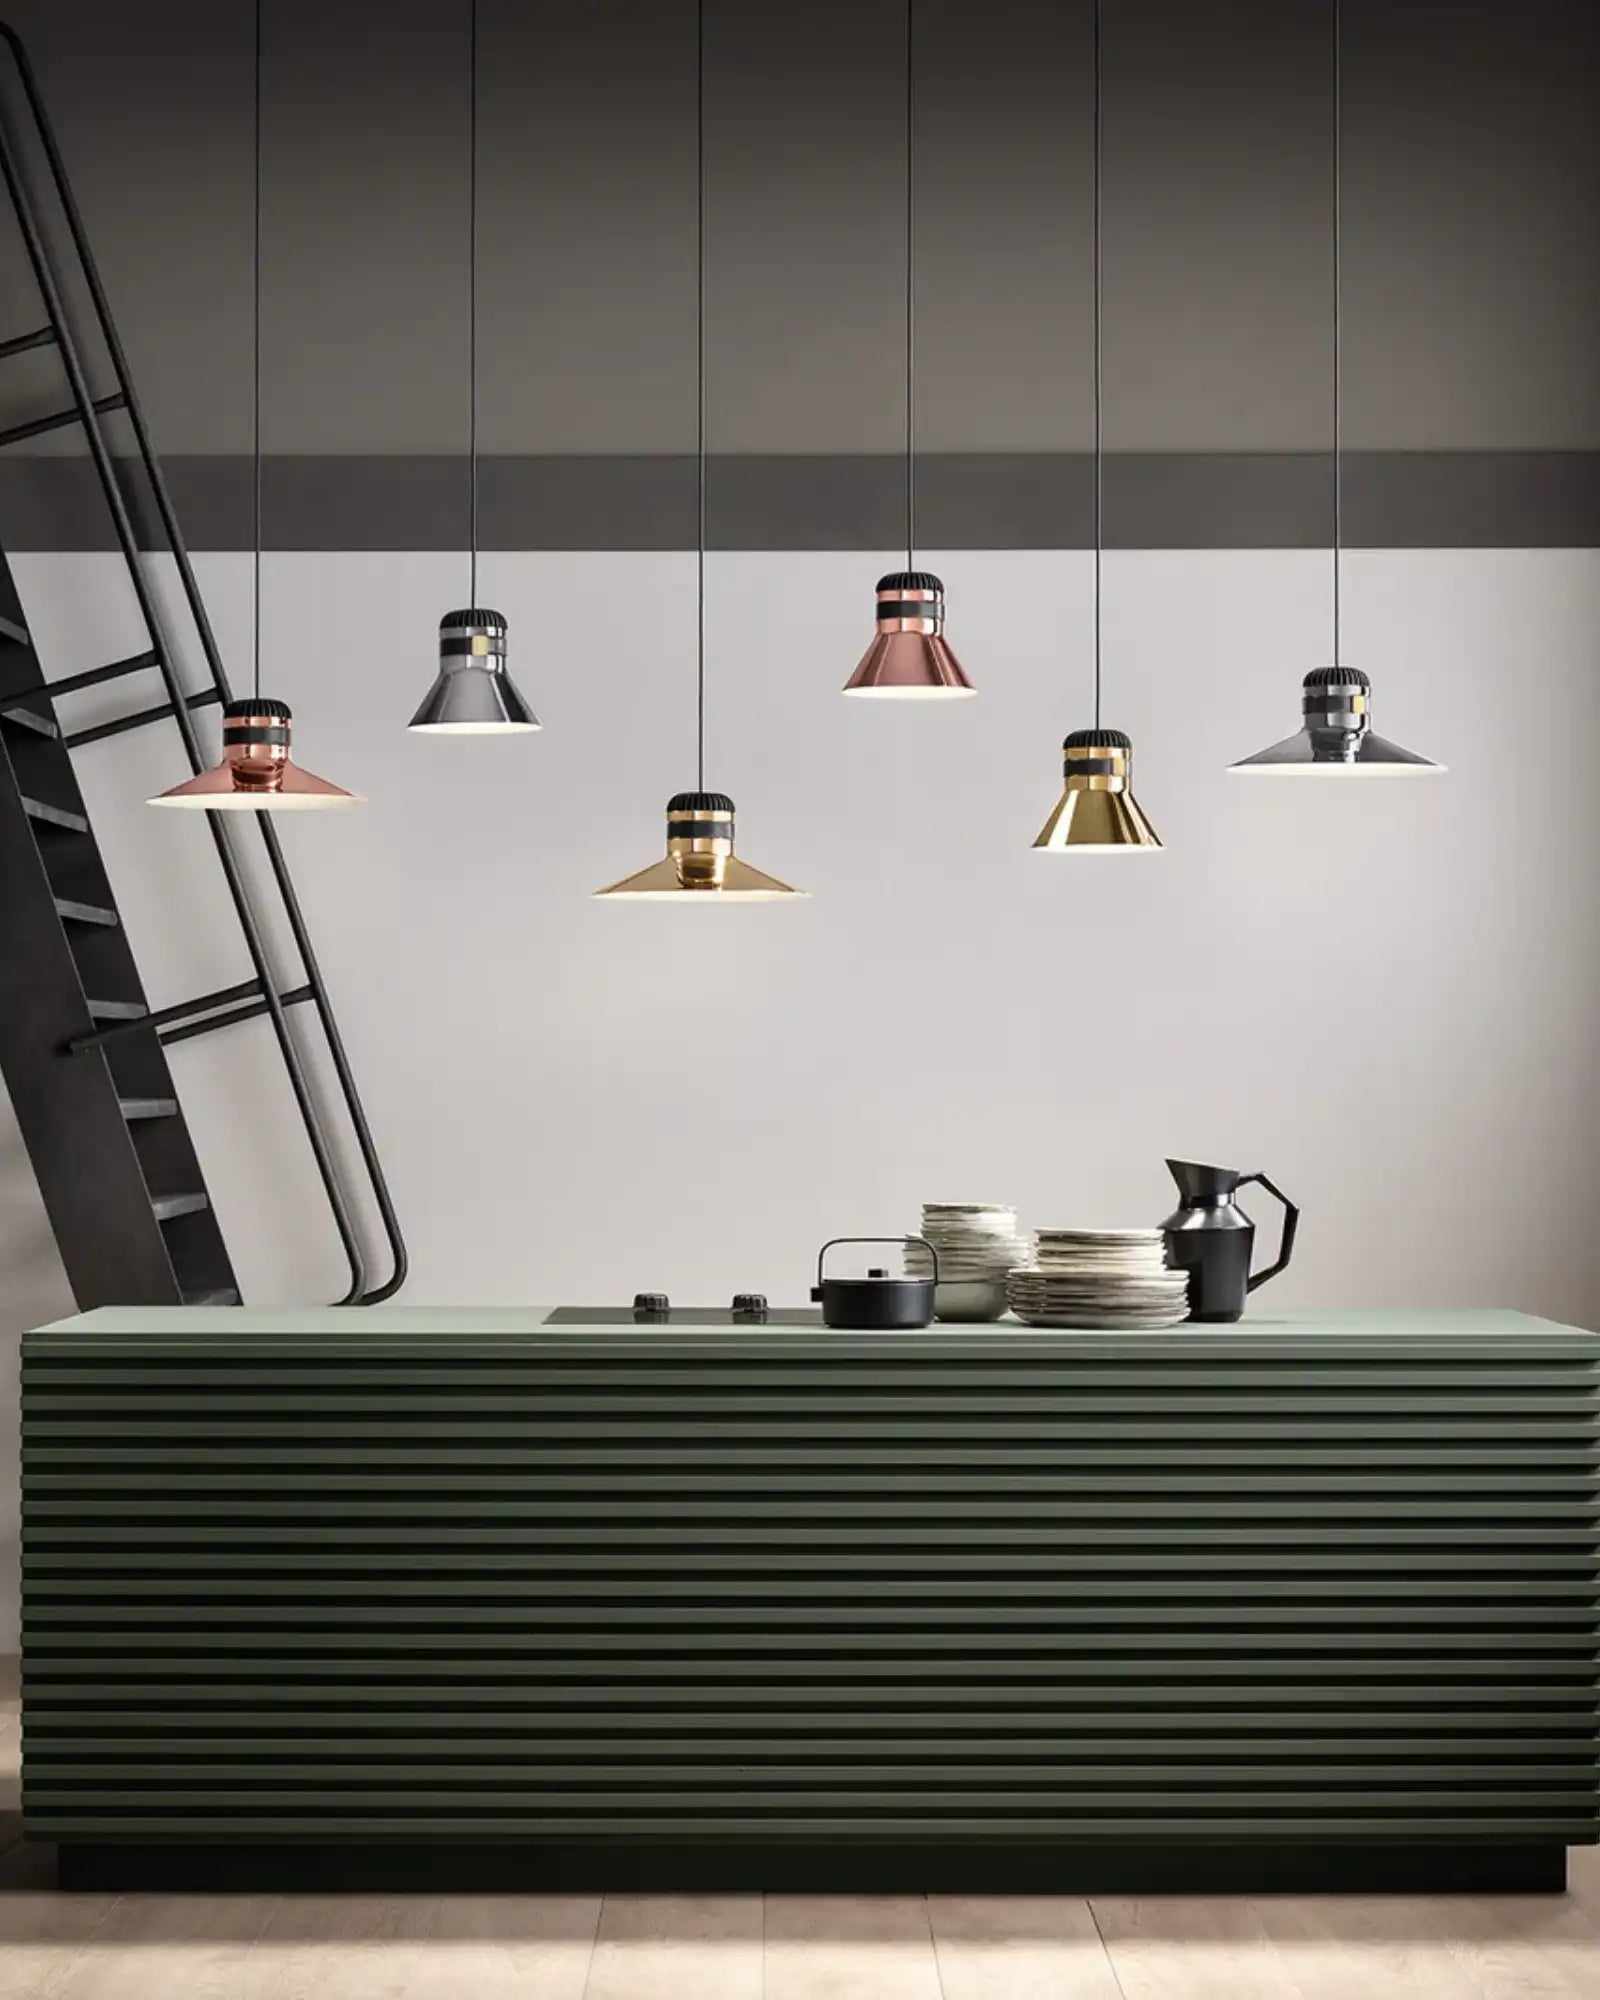 Cordea Pendant Light by Masiero Lighting featured within a modern kitchen | Nook Collections